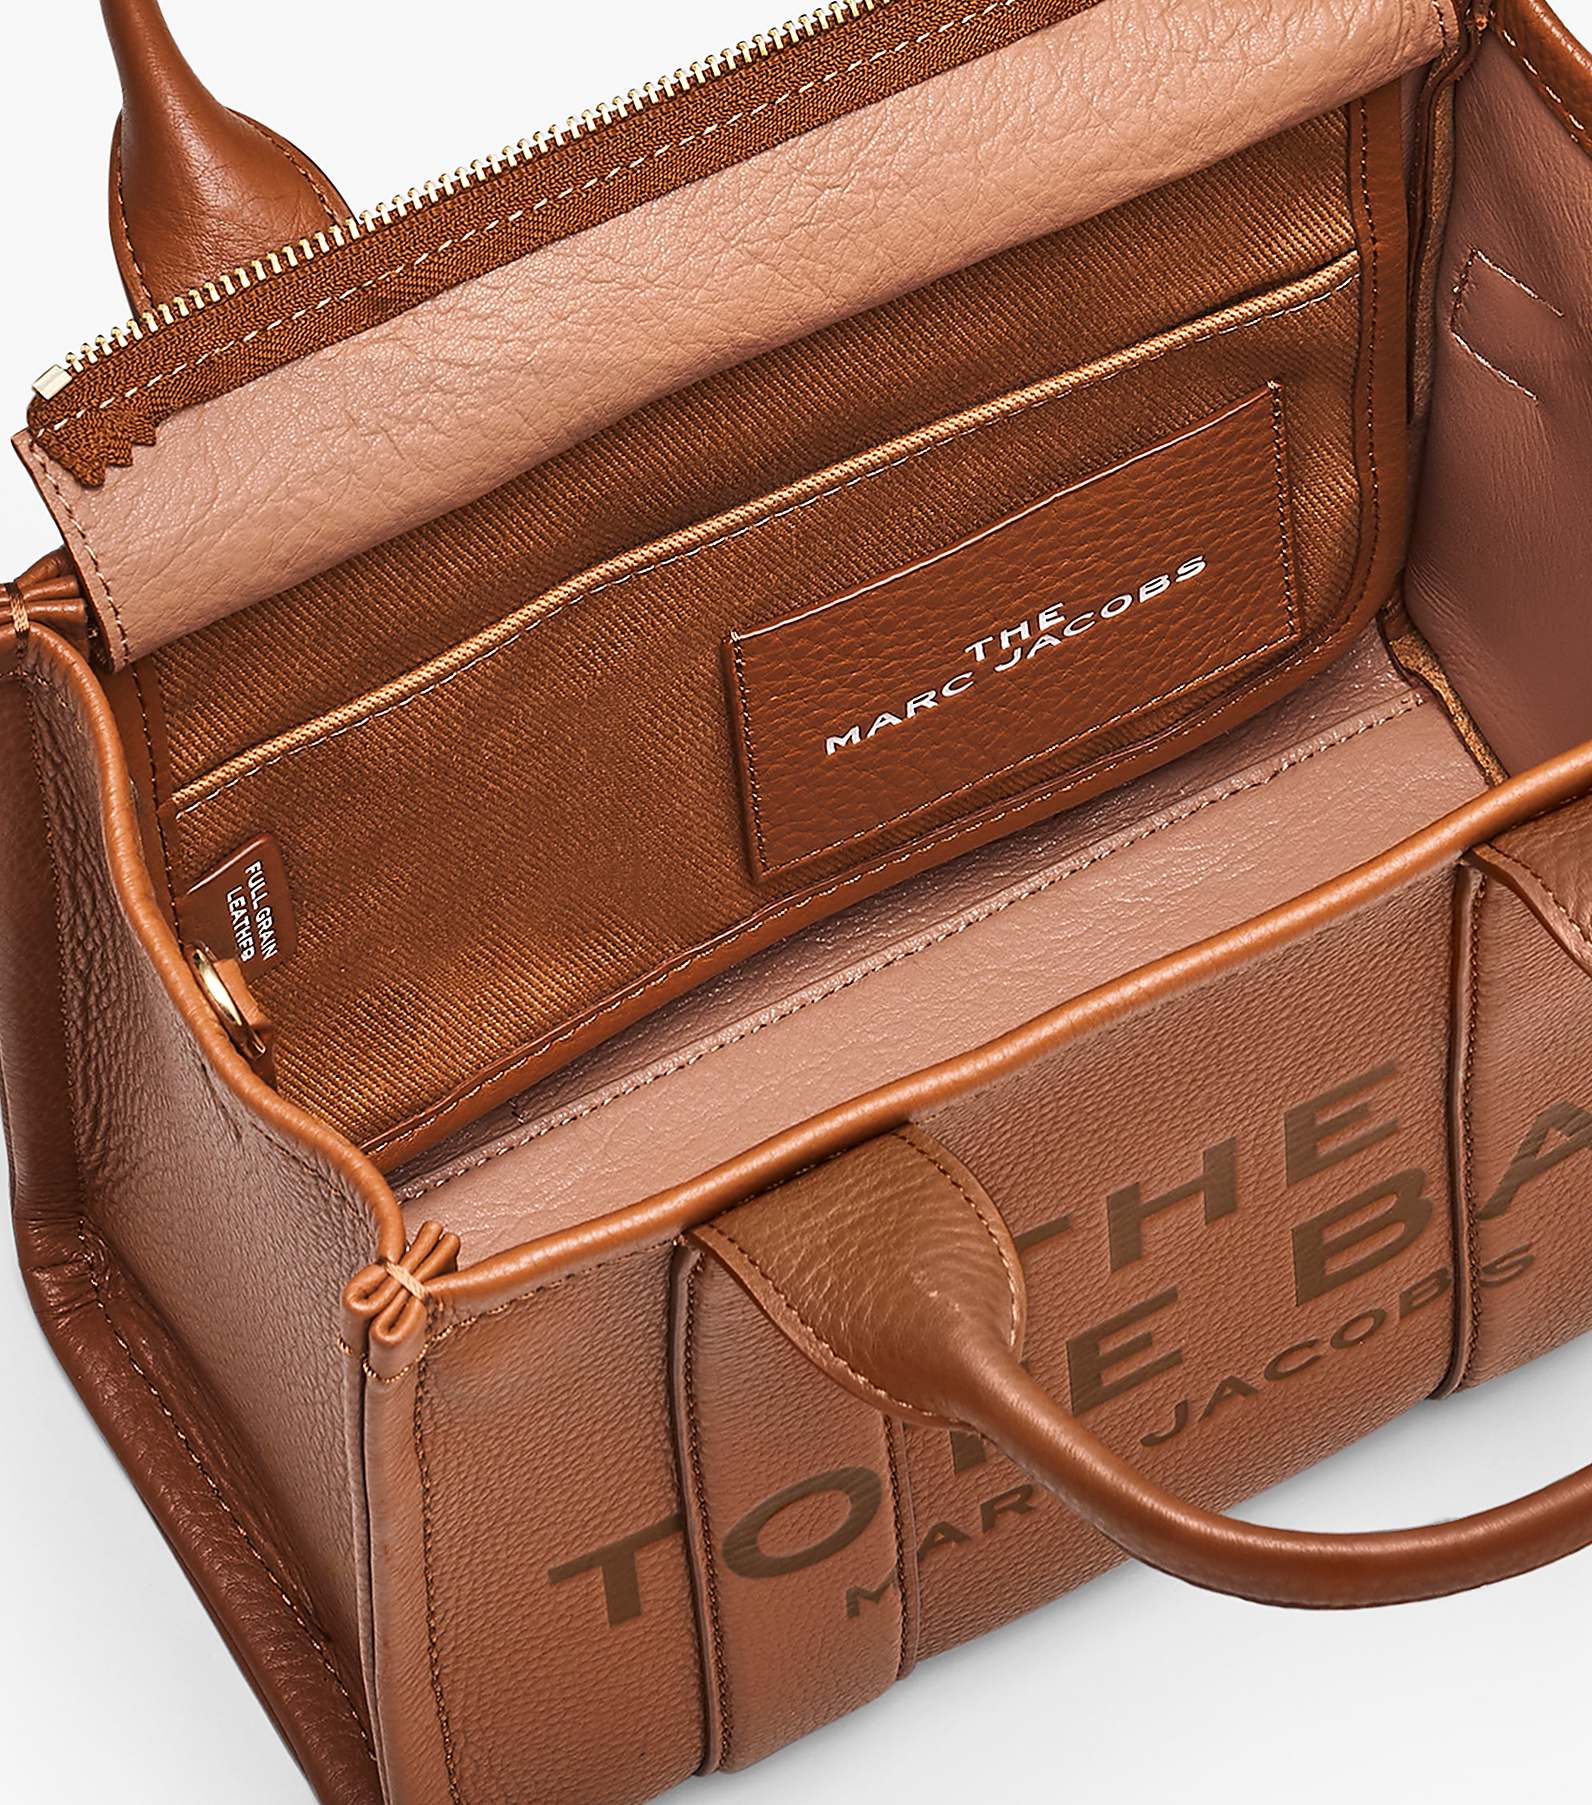 The Leather Mini Tote Bag | Marc Jacobs | Official Site